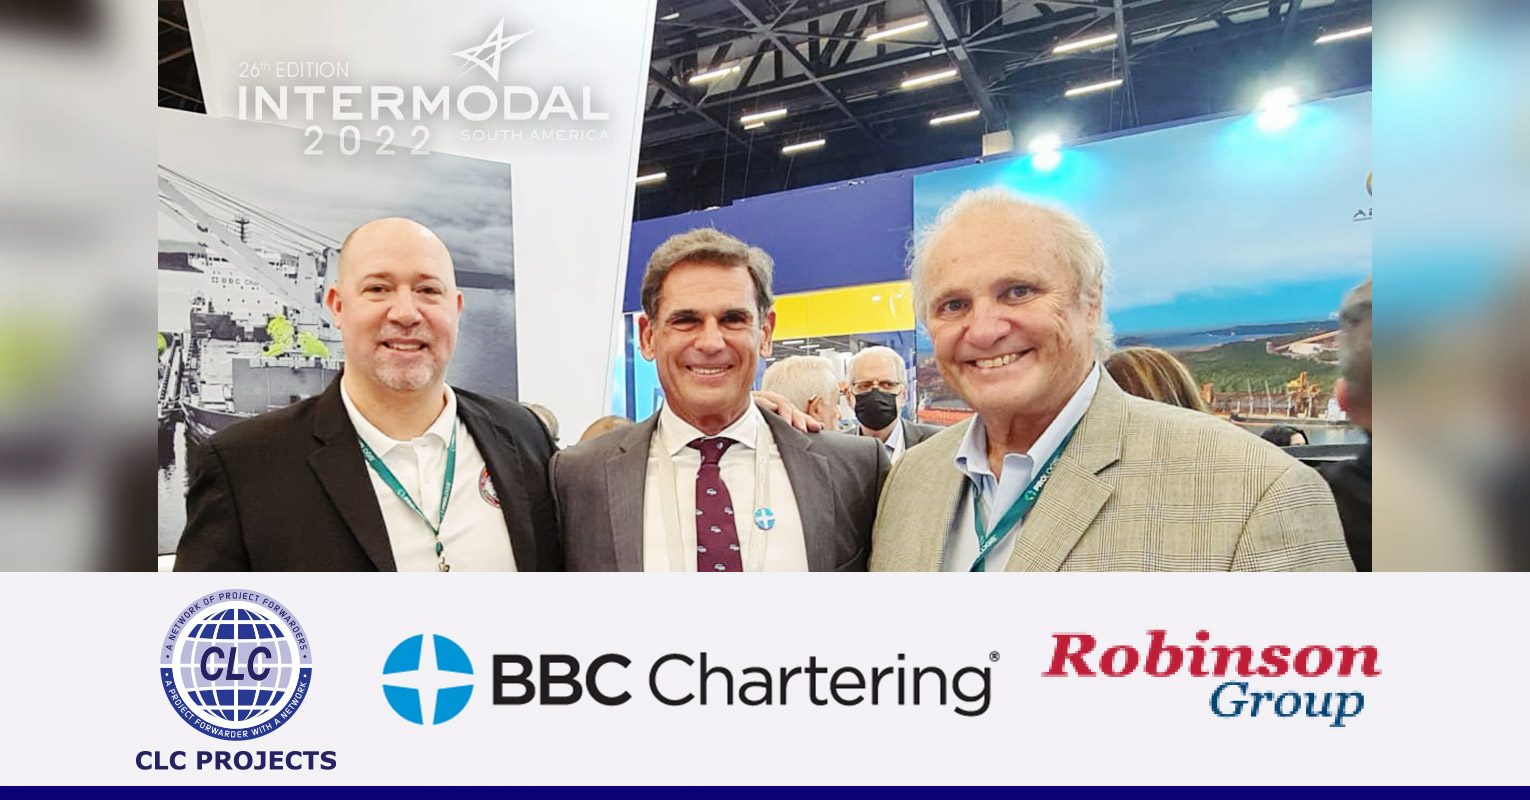 CLC Projects meeting with Bob Kroger, Head of Branch Office at BBC Chartering São Paulo and Andrew Robinson, CEO of Robinson Group at Intermodal South America